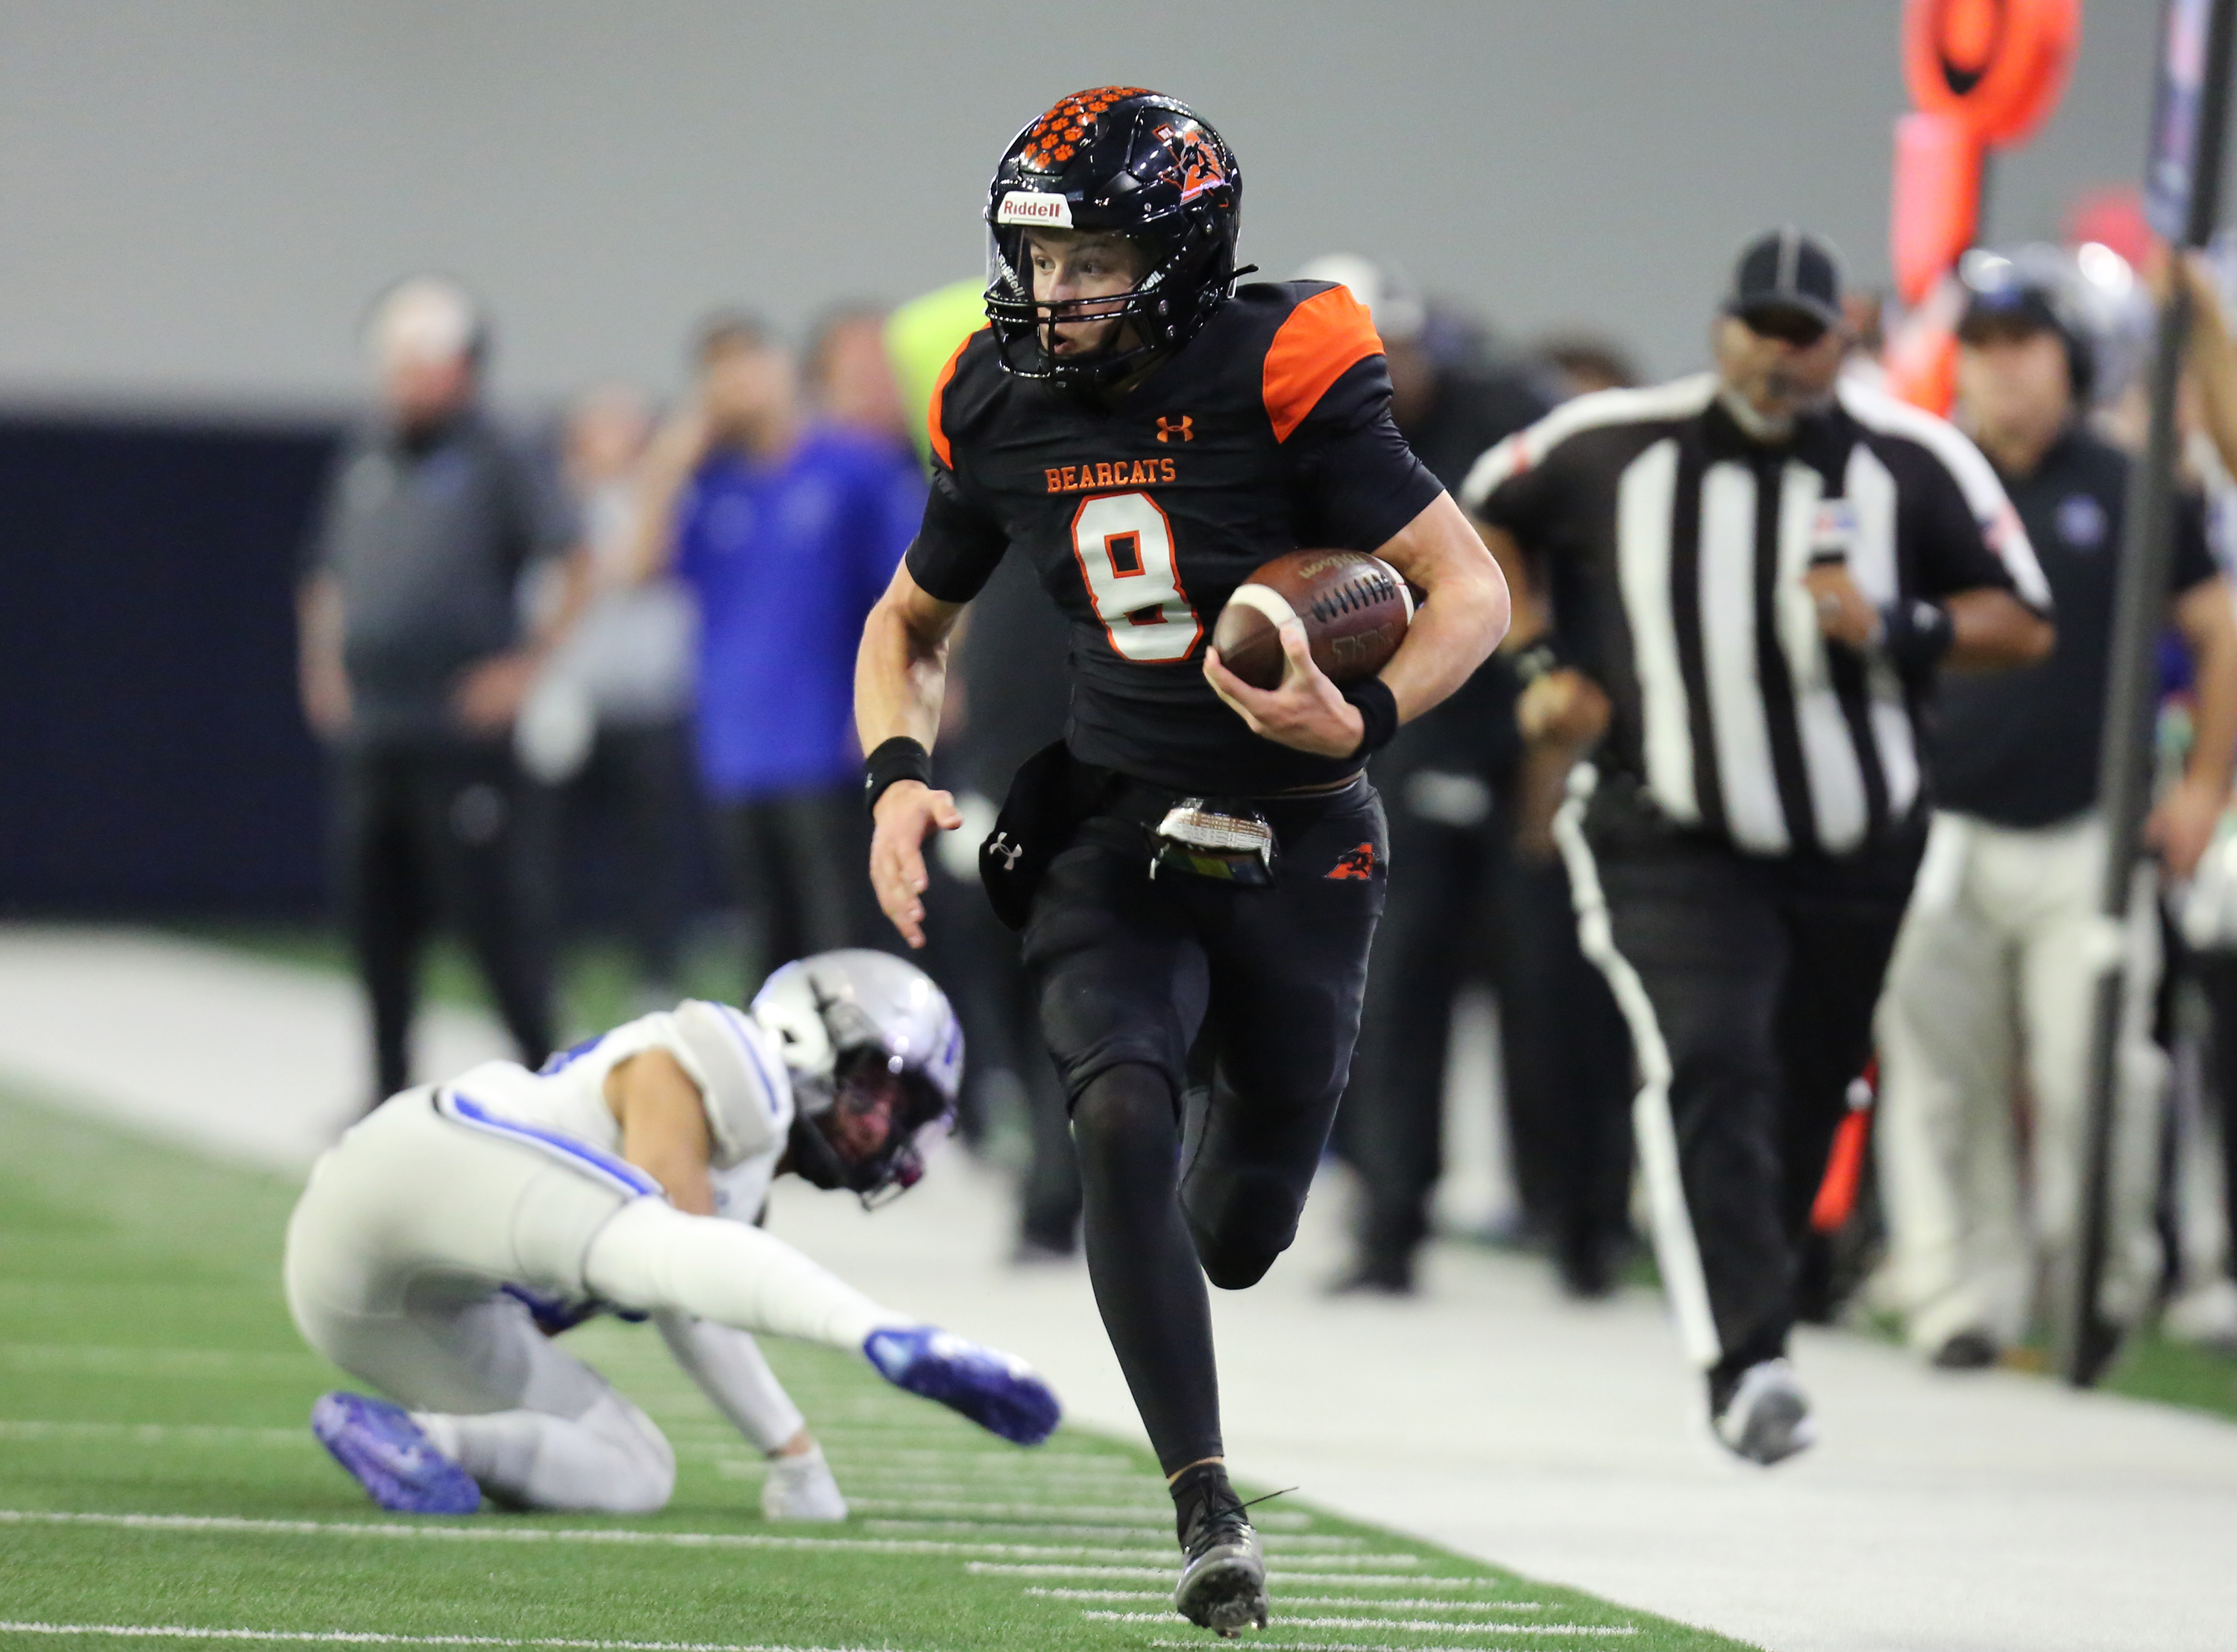 Look Hauss Hejny leads Aledo over Burleson Centennial in UIL 5A